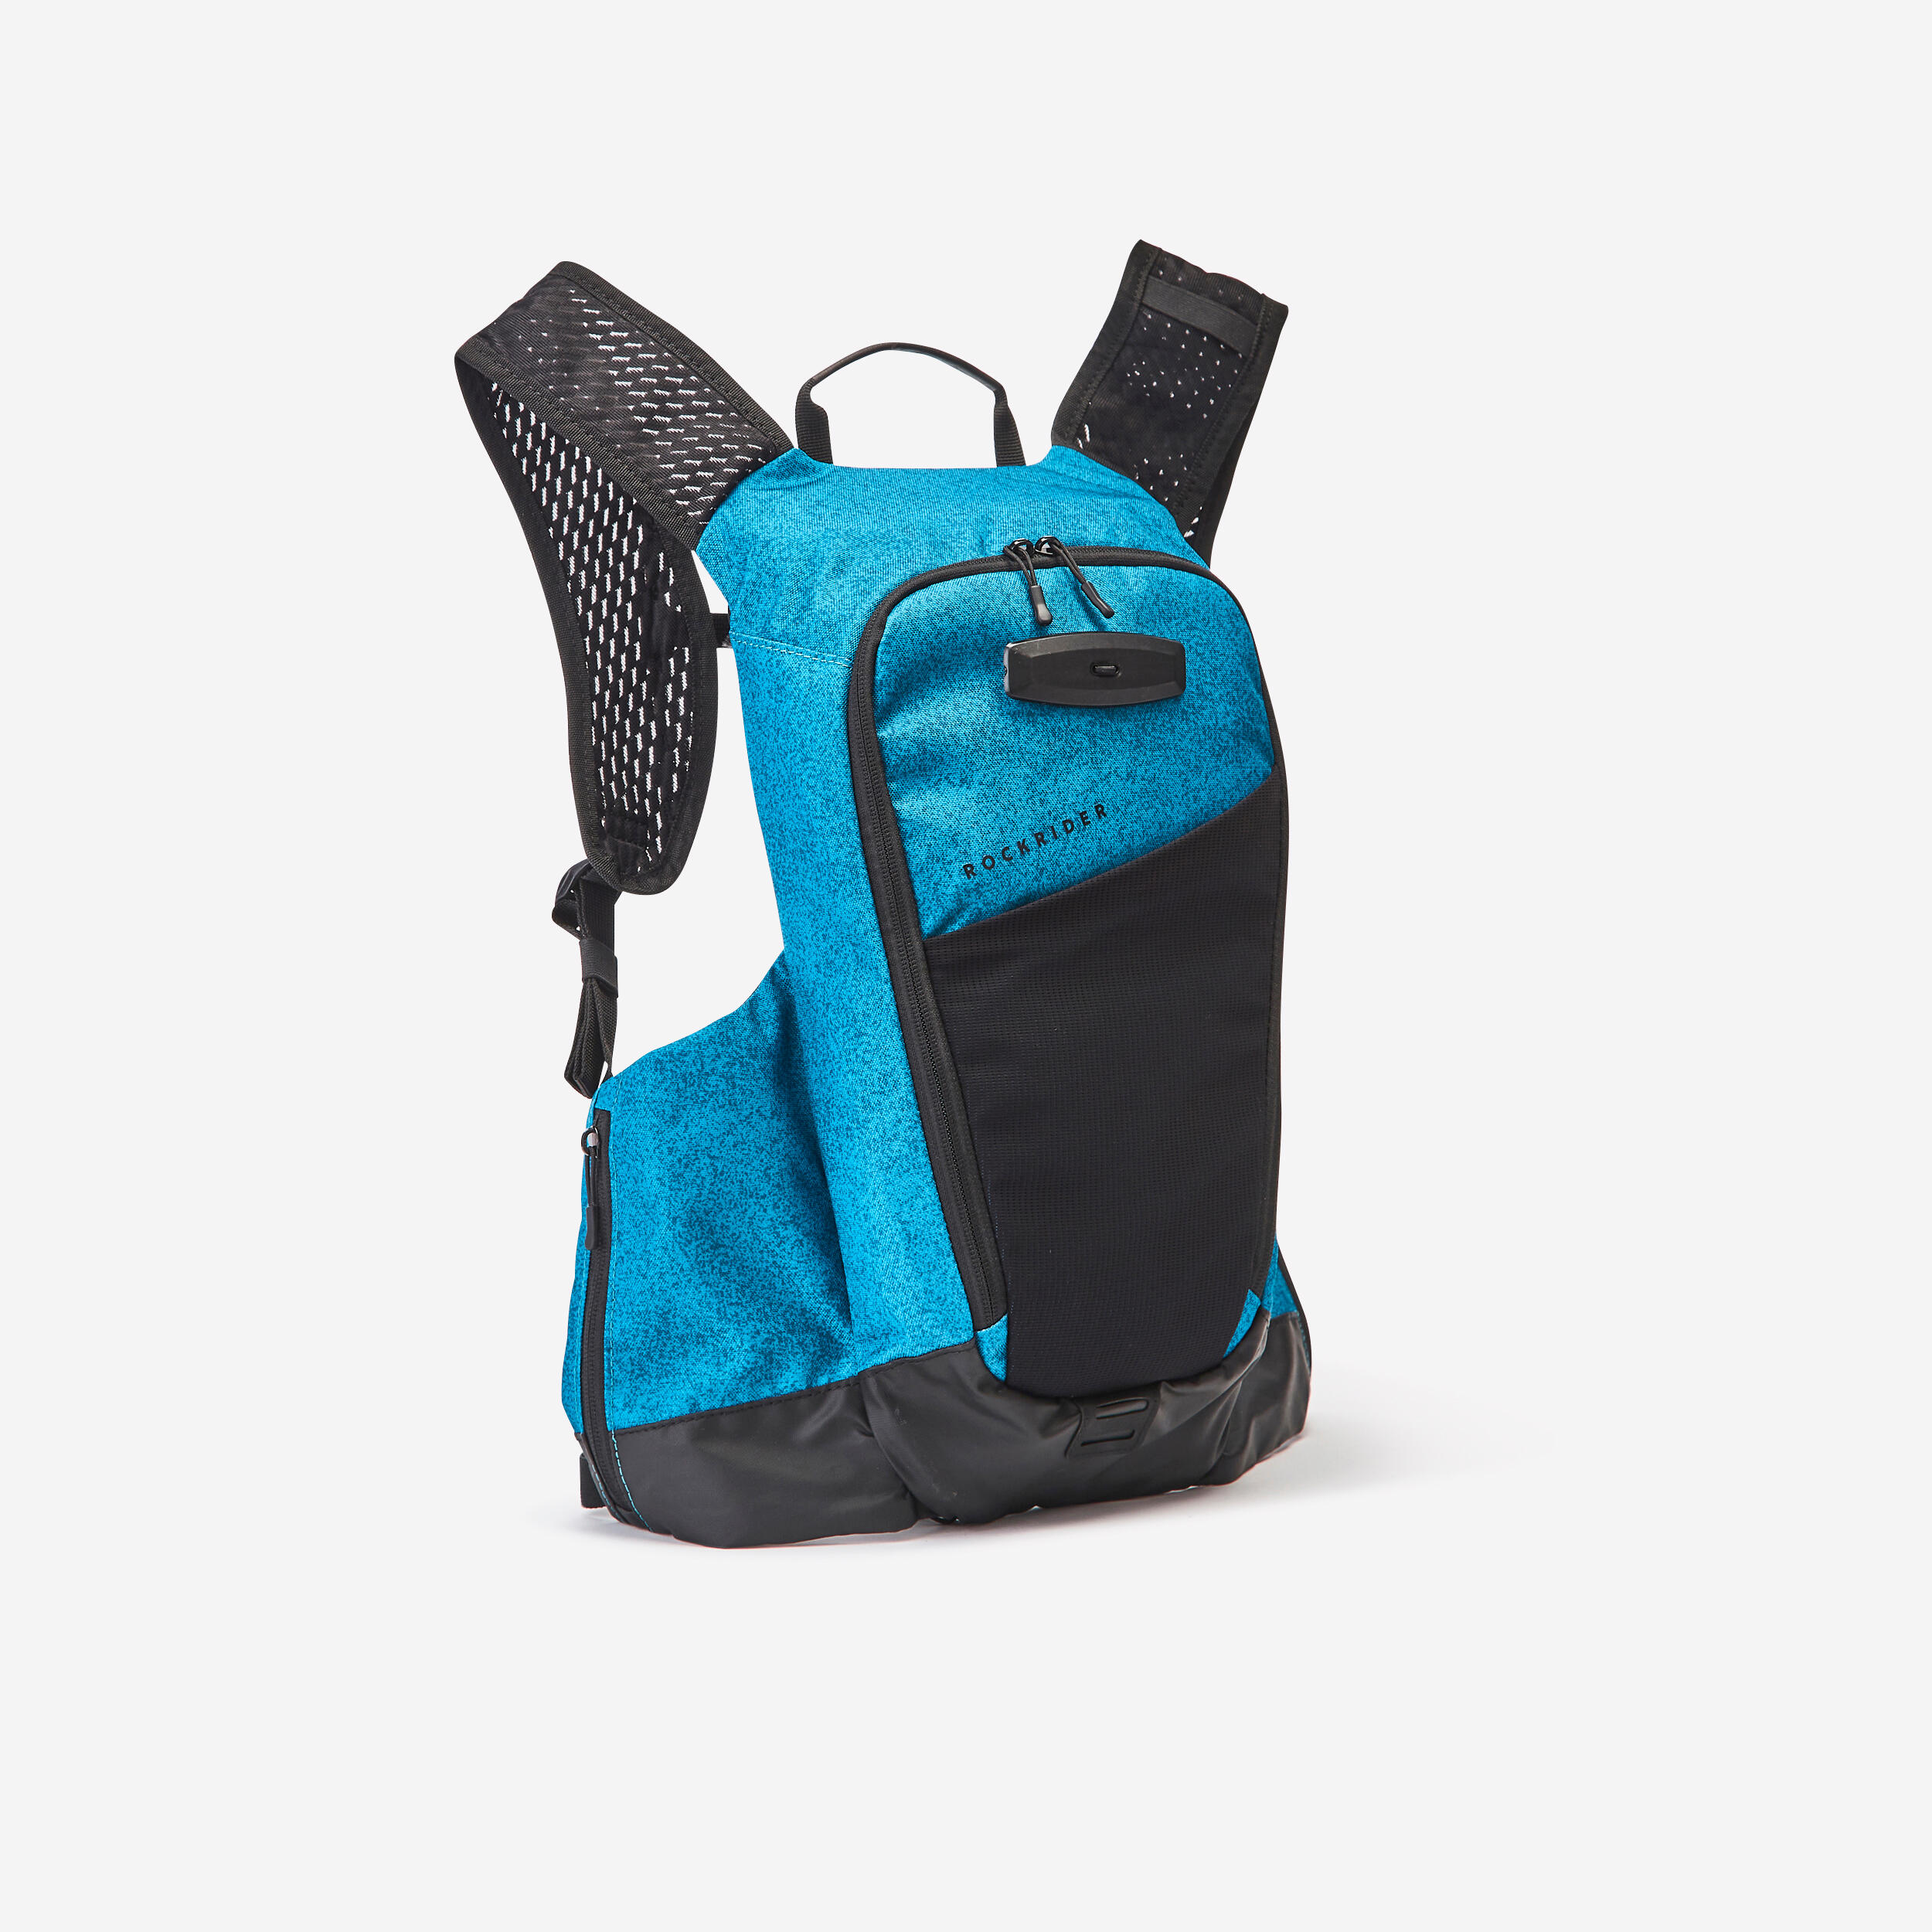 Mountain Bike Hydration Backpack Explore 7L/2L Water - Turquoise Blue 2/18